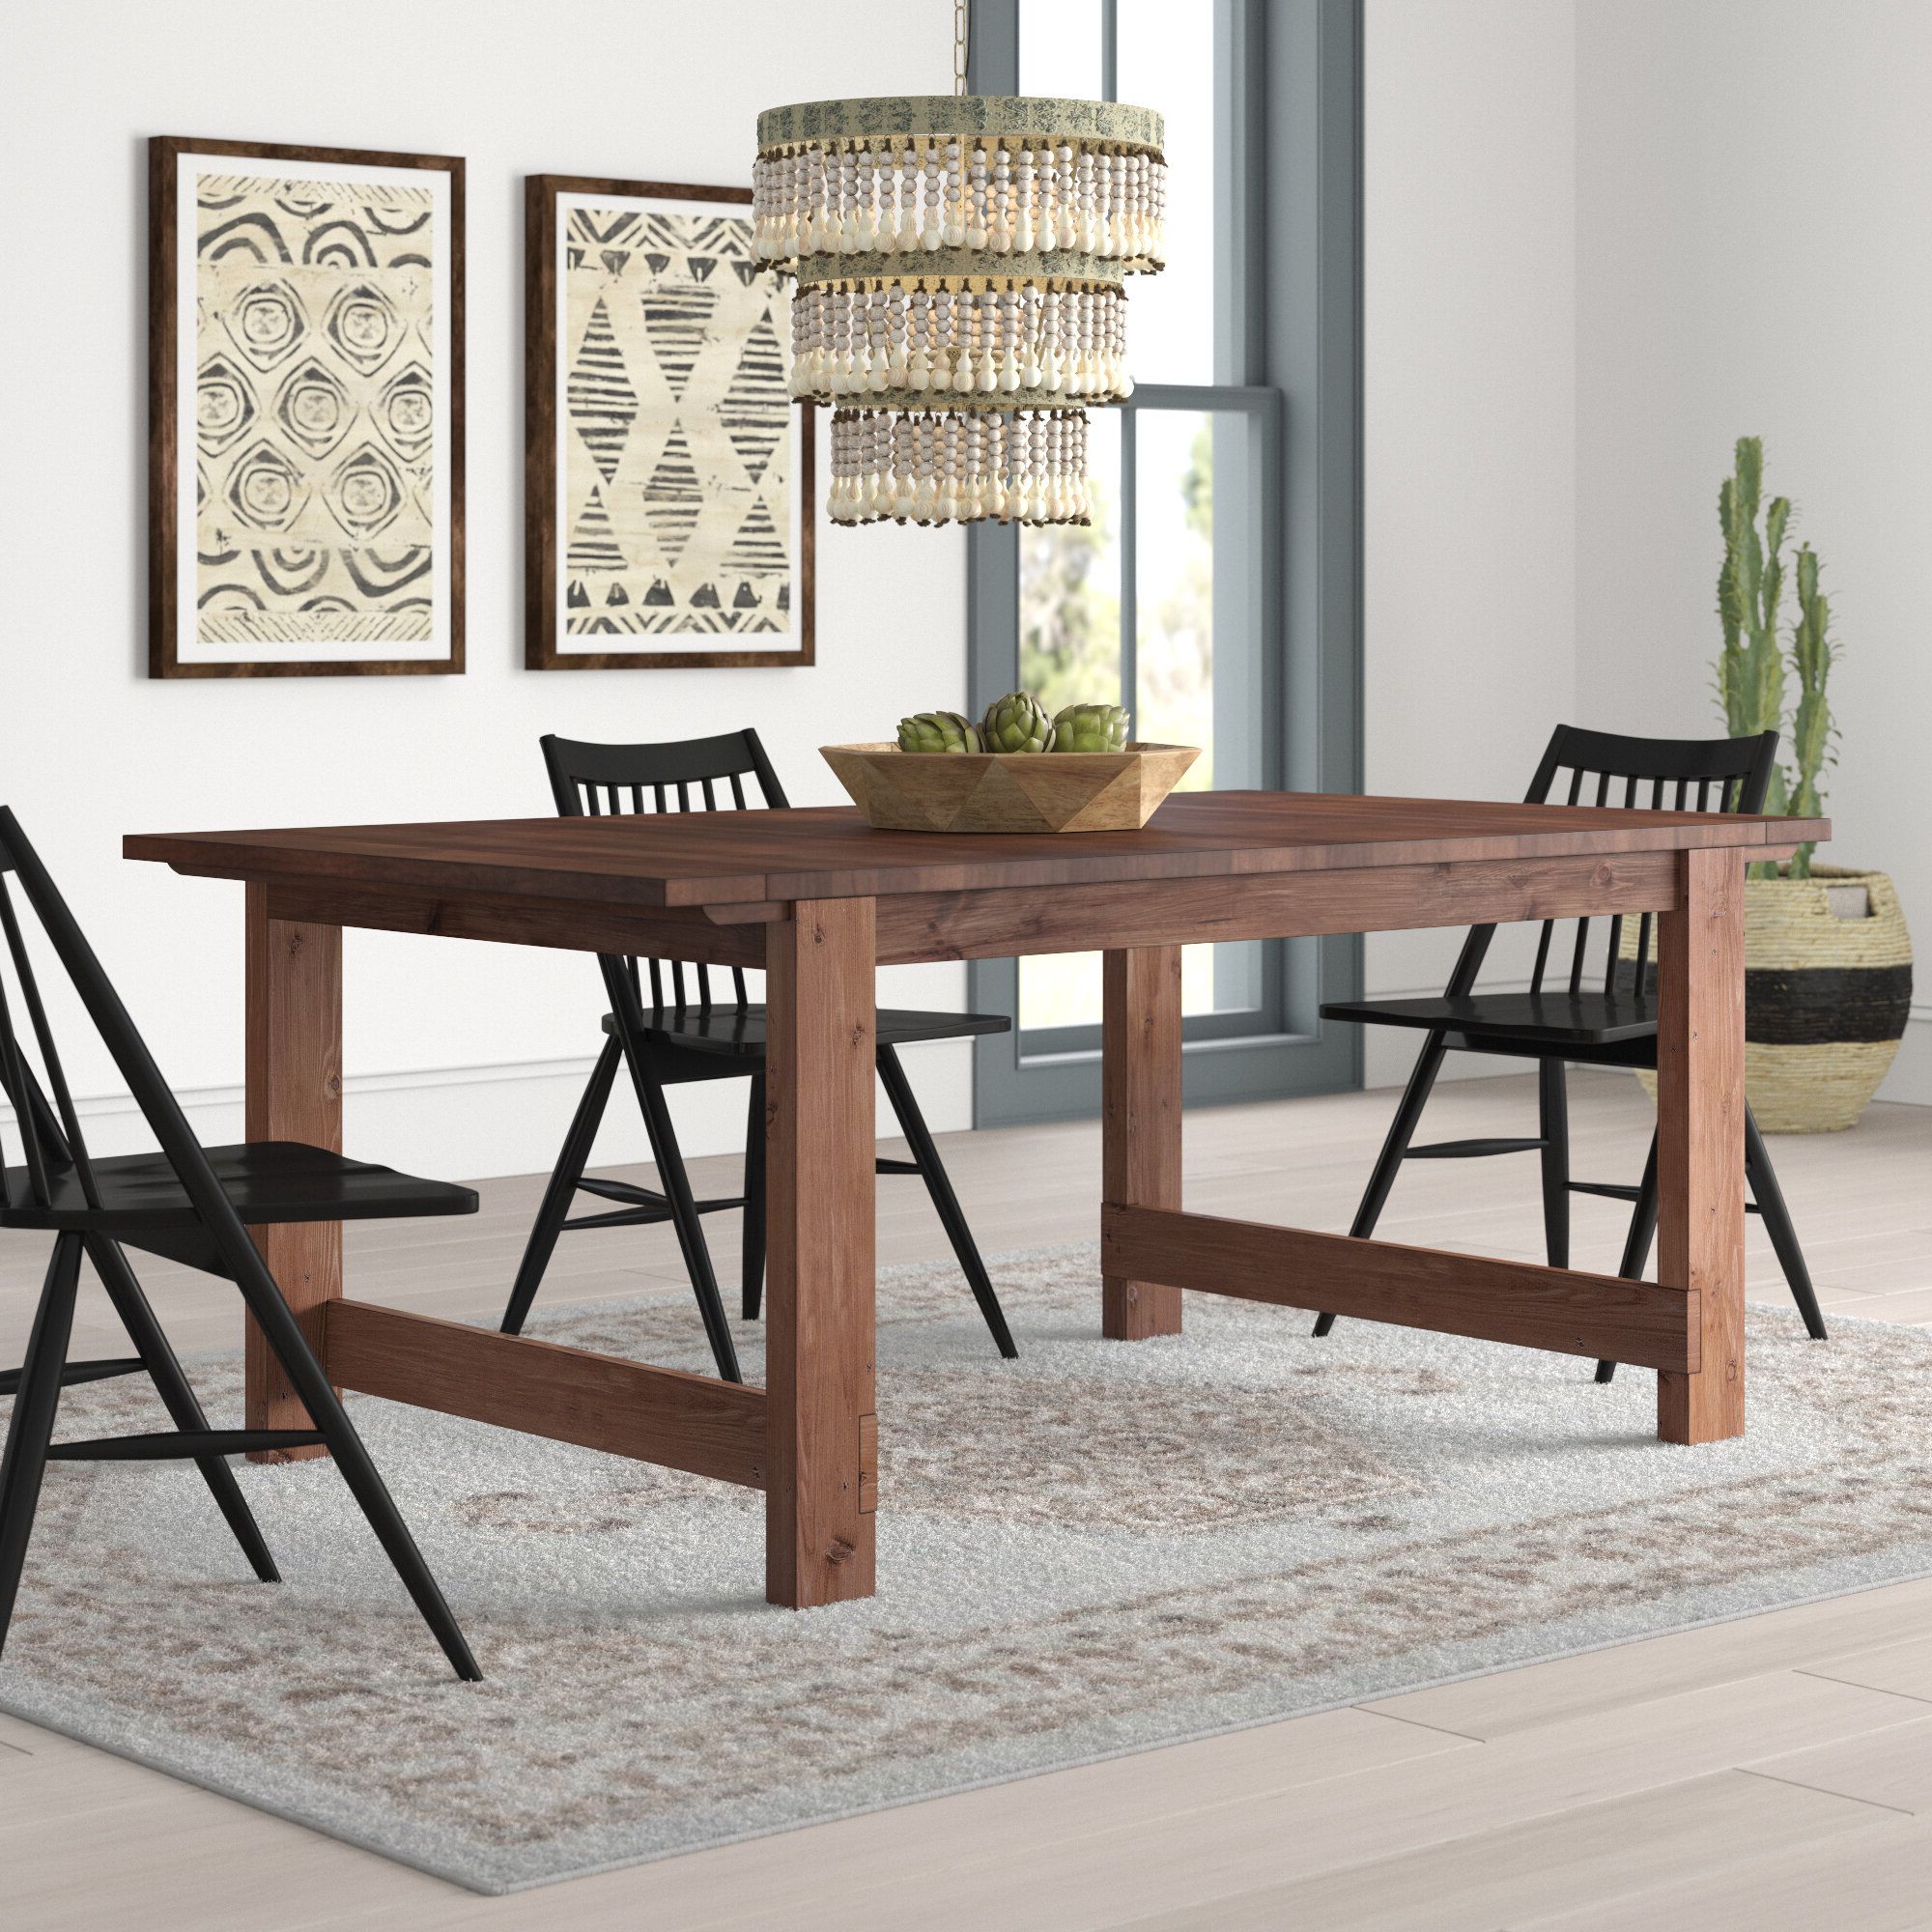 Well Known Rustic Mahogany Extending Dining Tables Intended For Trevion Trestle Extendable Dining Table (View 21 of 25)